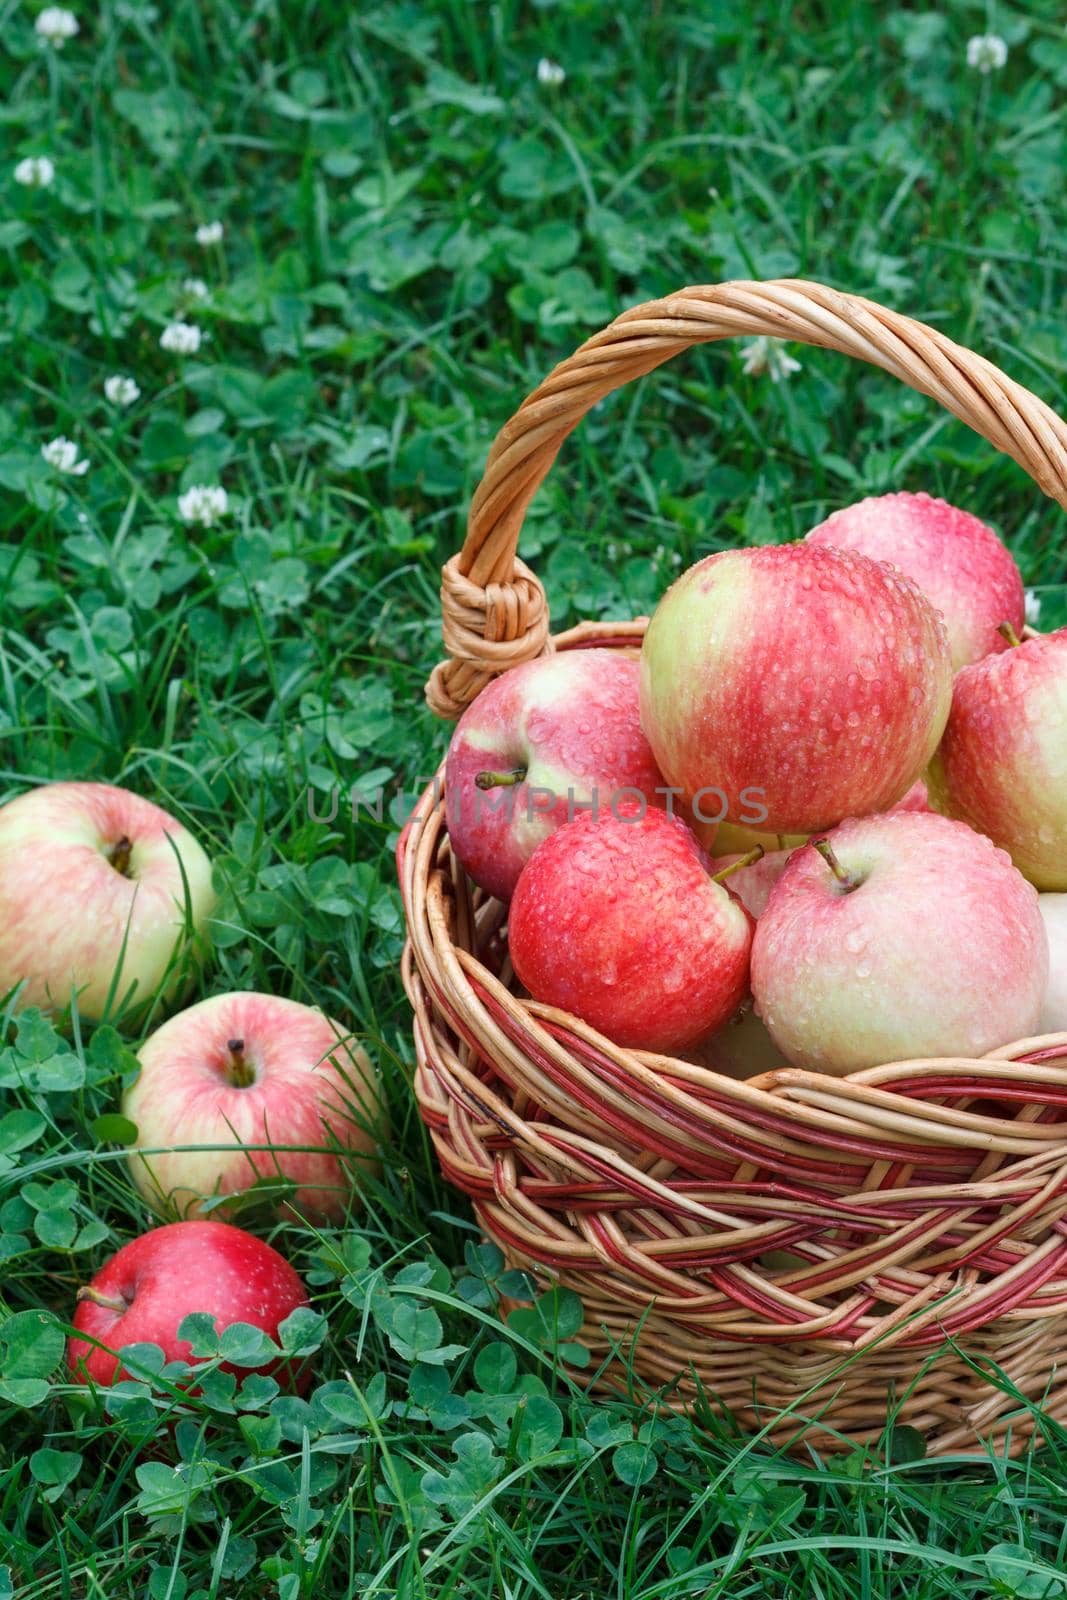 Just picked apples in a wicker basket and on green grass in the garden. Just harvested fruits.